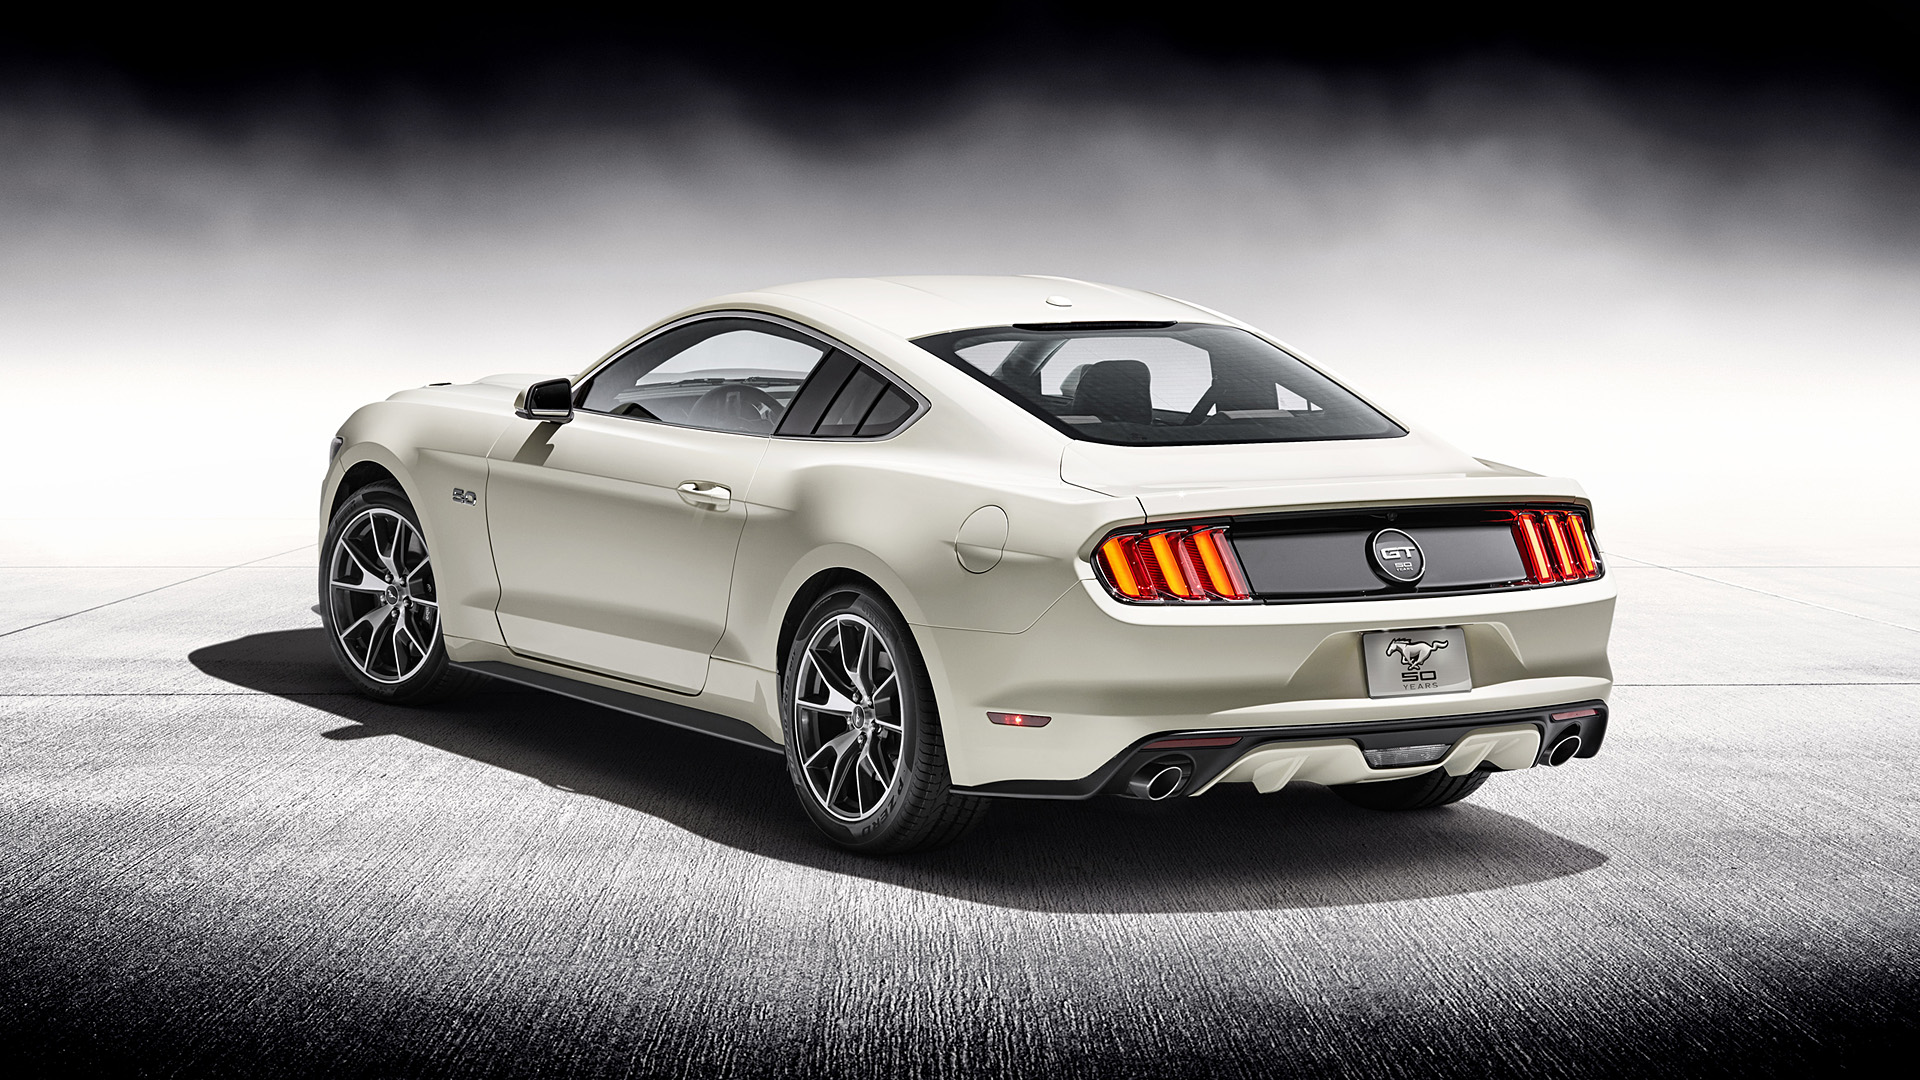  2015 Ford Mustang 50 Year Limited Edition Wallpaper.